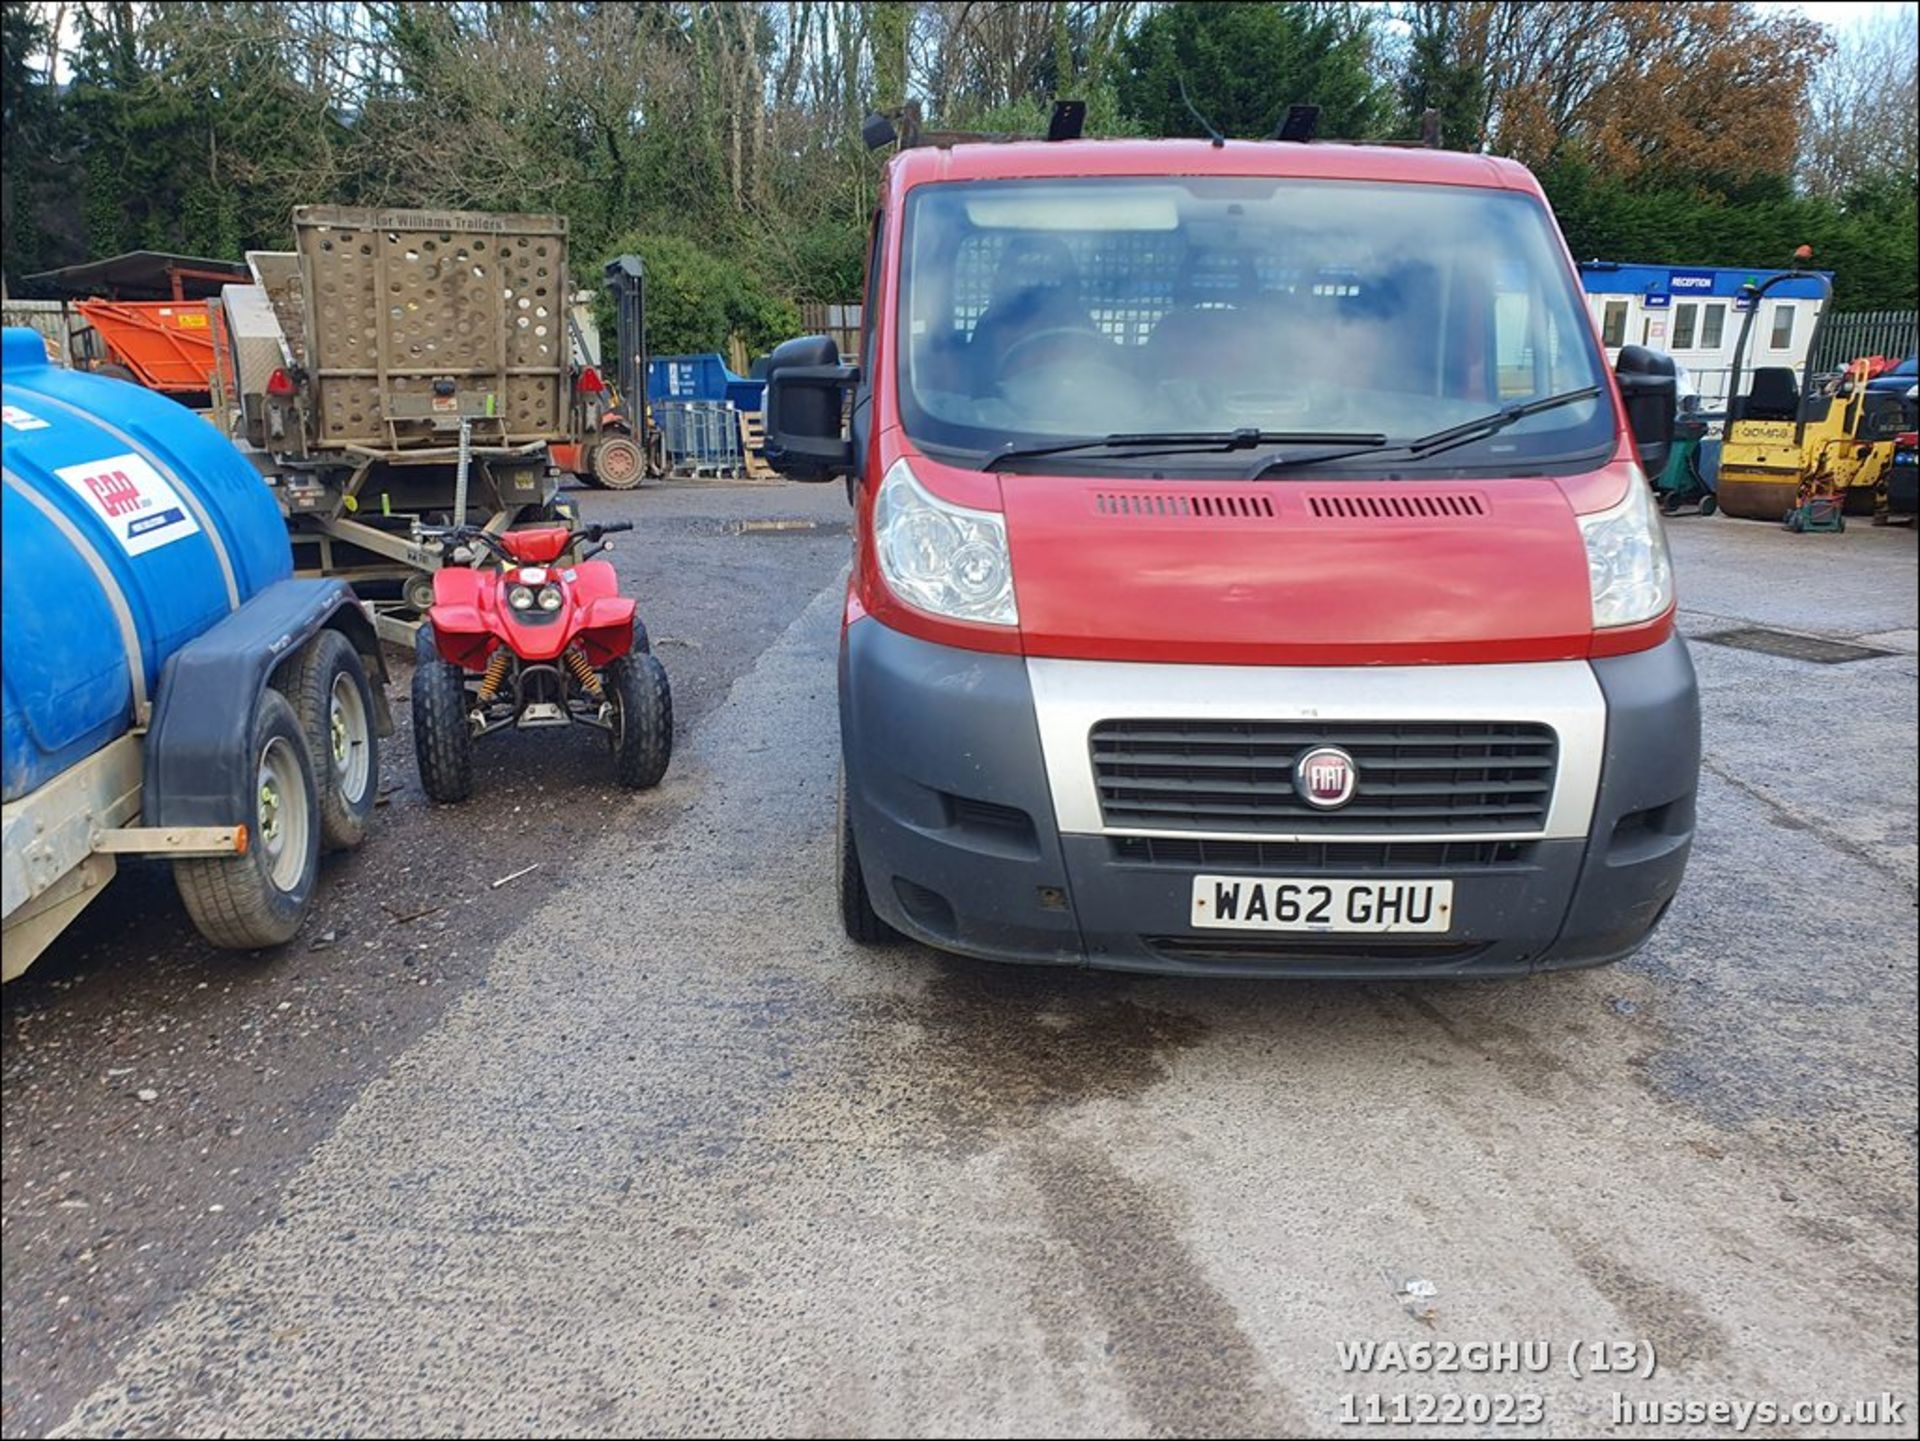 12/62 FIAT DUCATO 35 MULTIJET - 2287cc 2.dr Flat Bed (Red) - Image 14 of 45